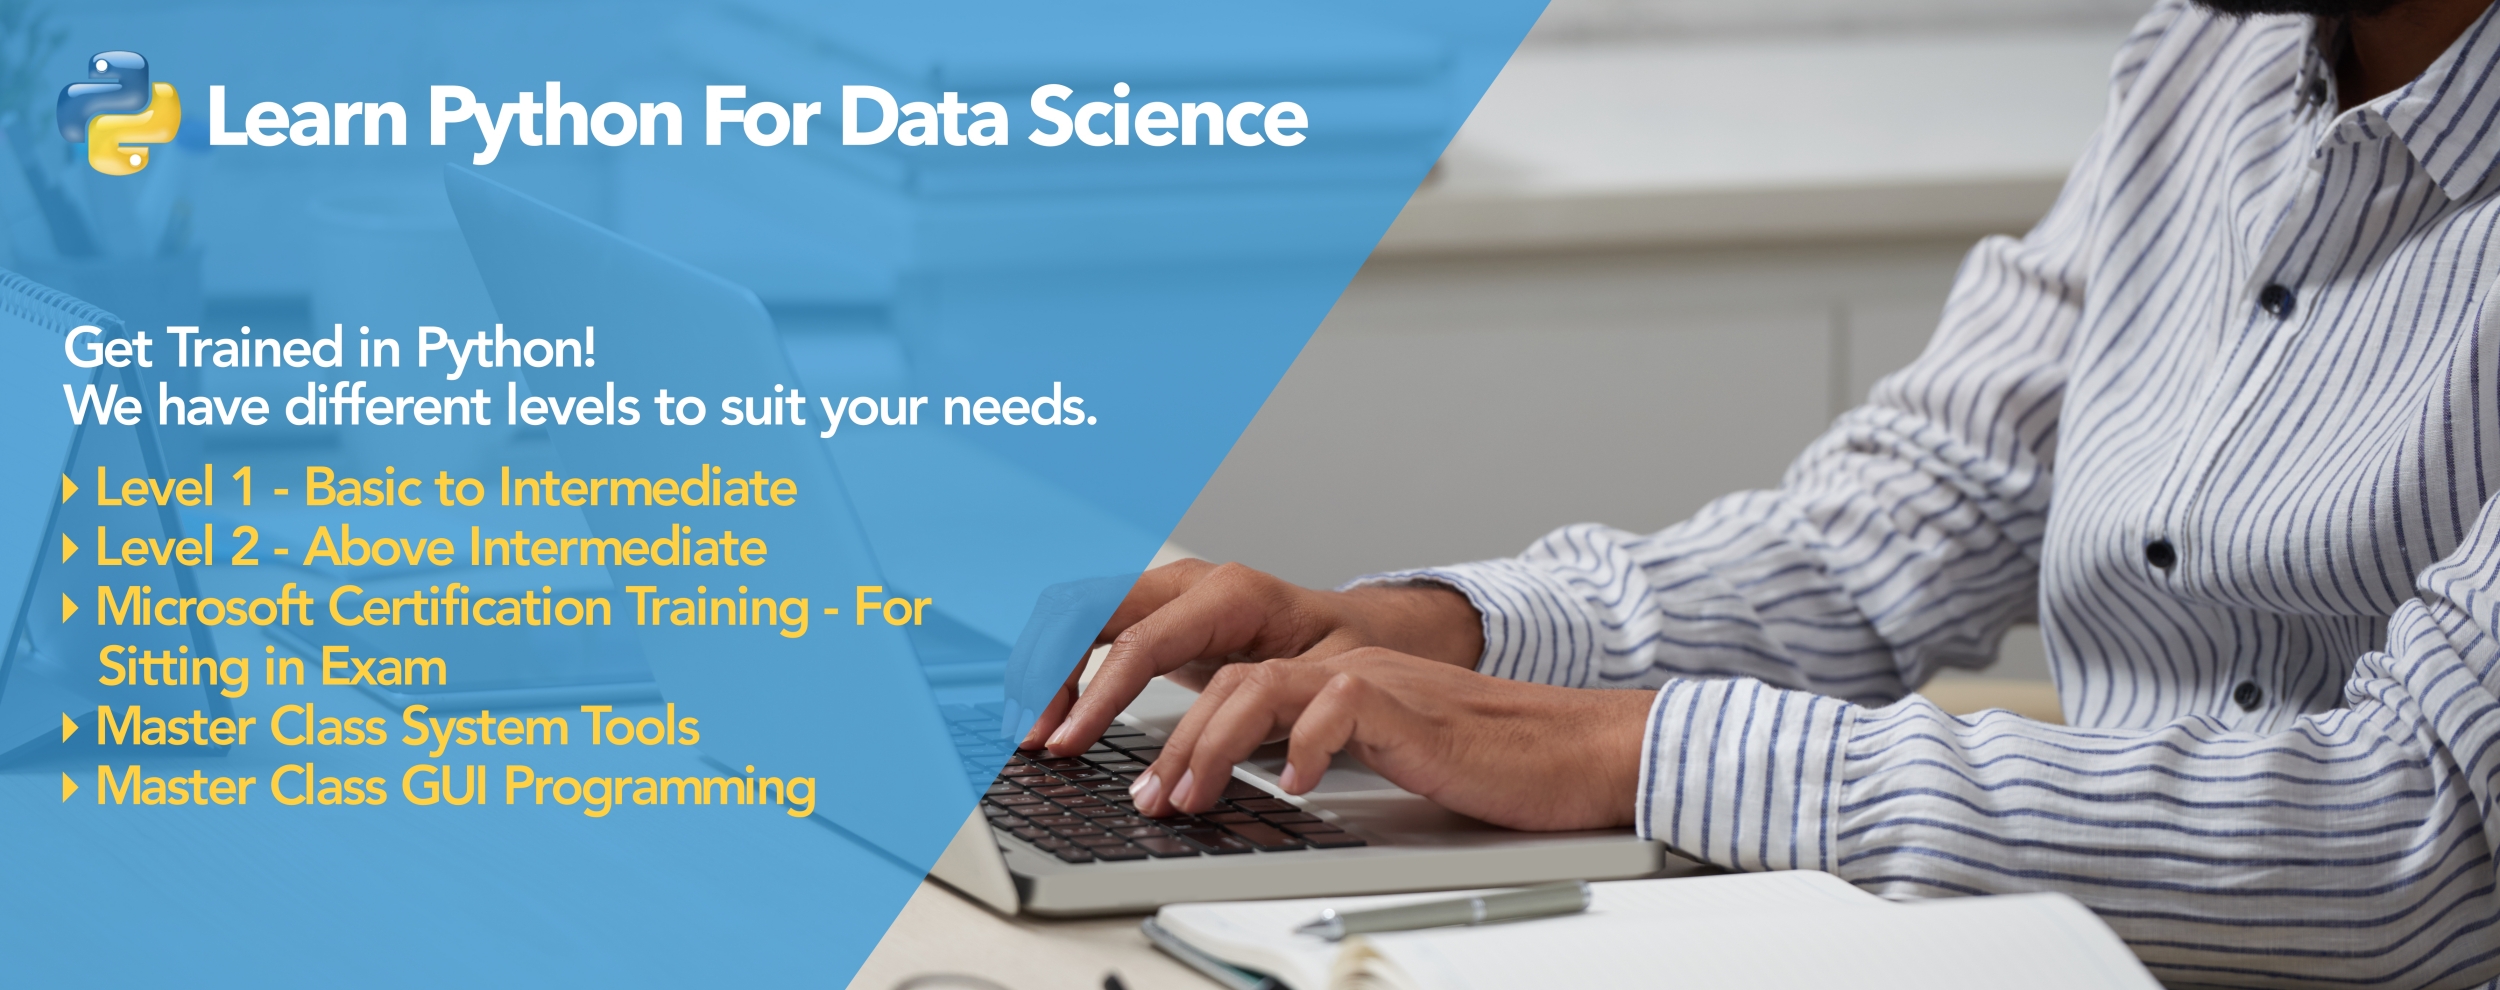 Learn Python For Data Science